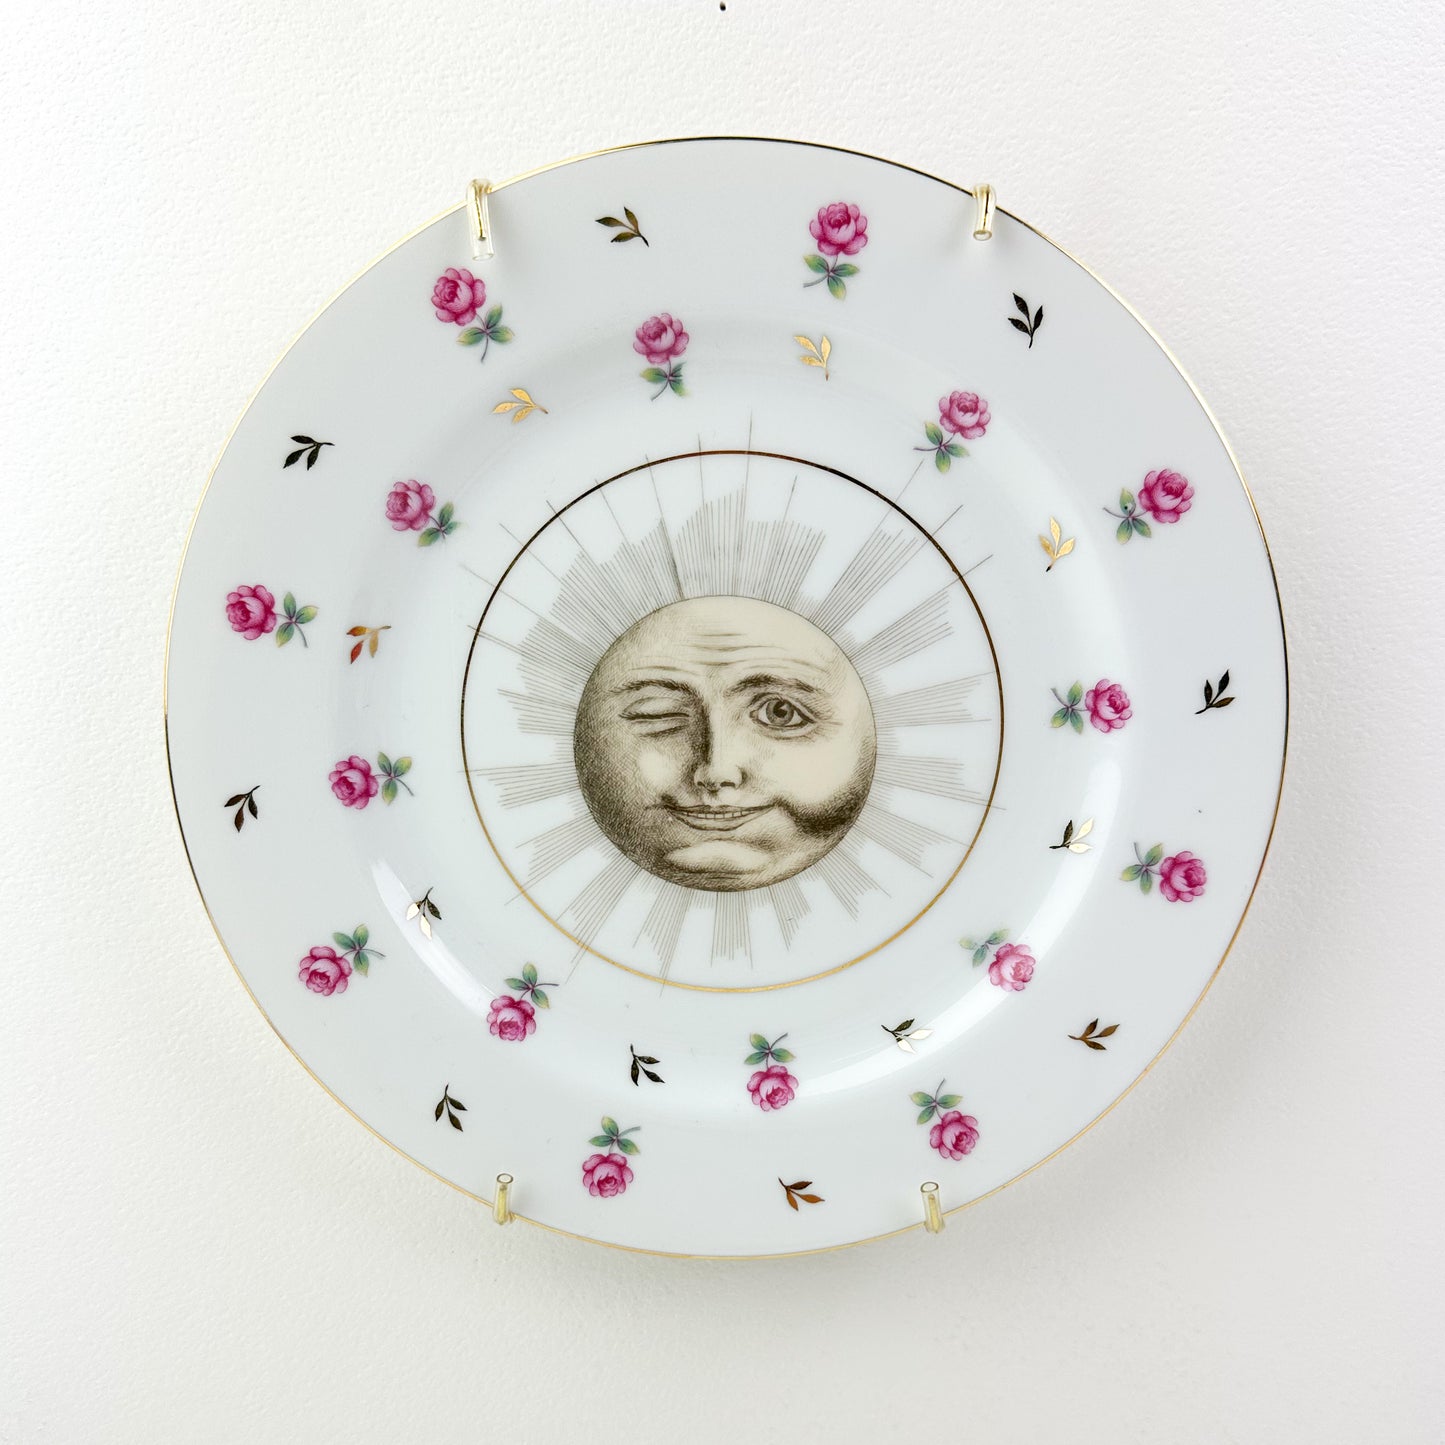 Artisan Made, One of a Kind Decorative Plate